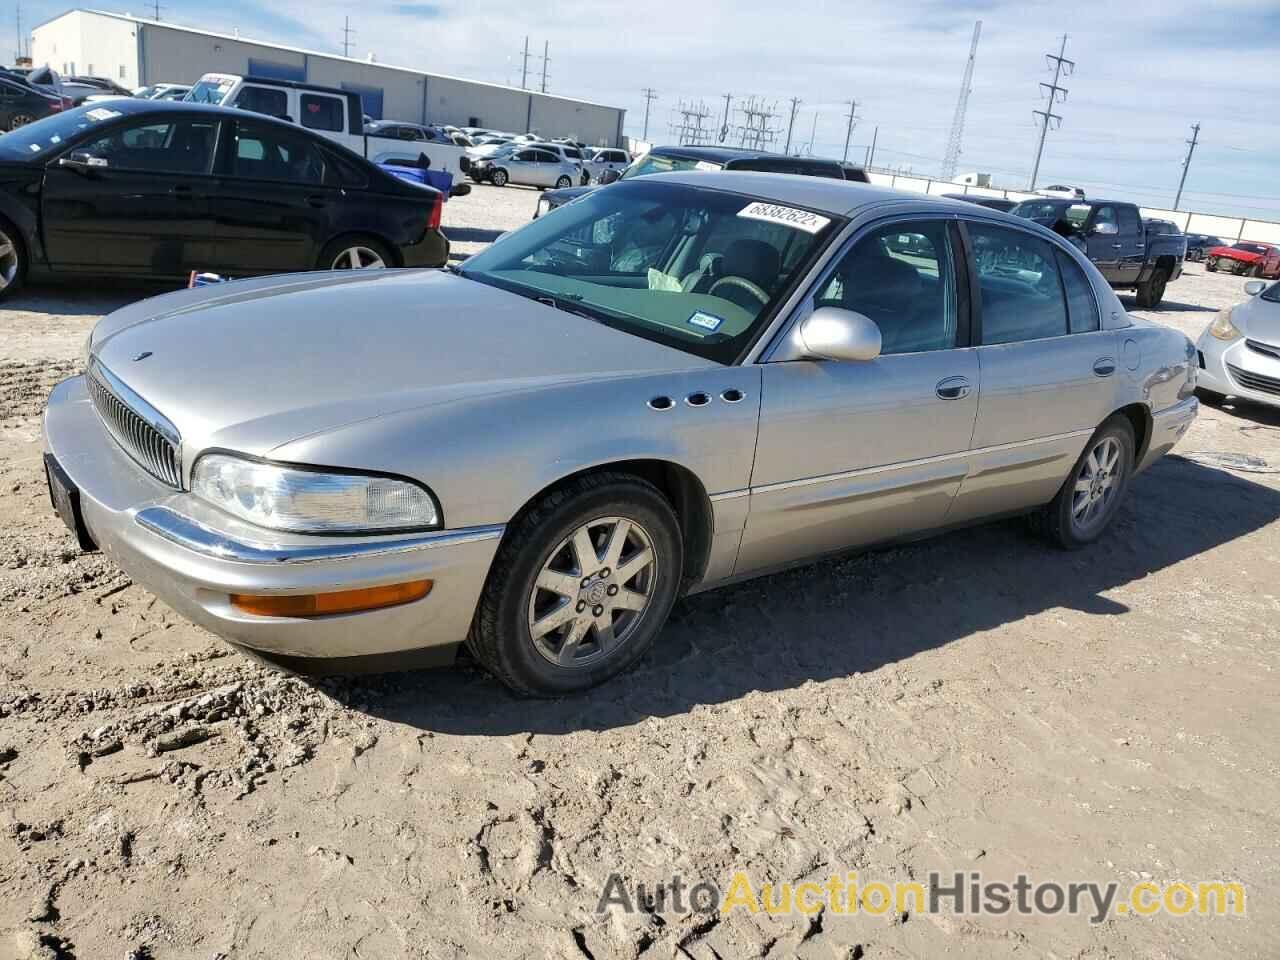 2005 BUICK PARK AVE, 1G4CW54K454104684